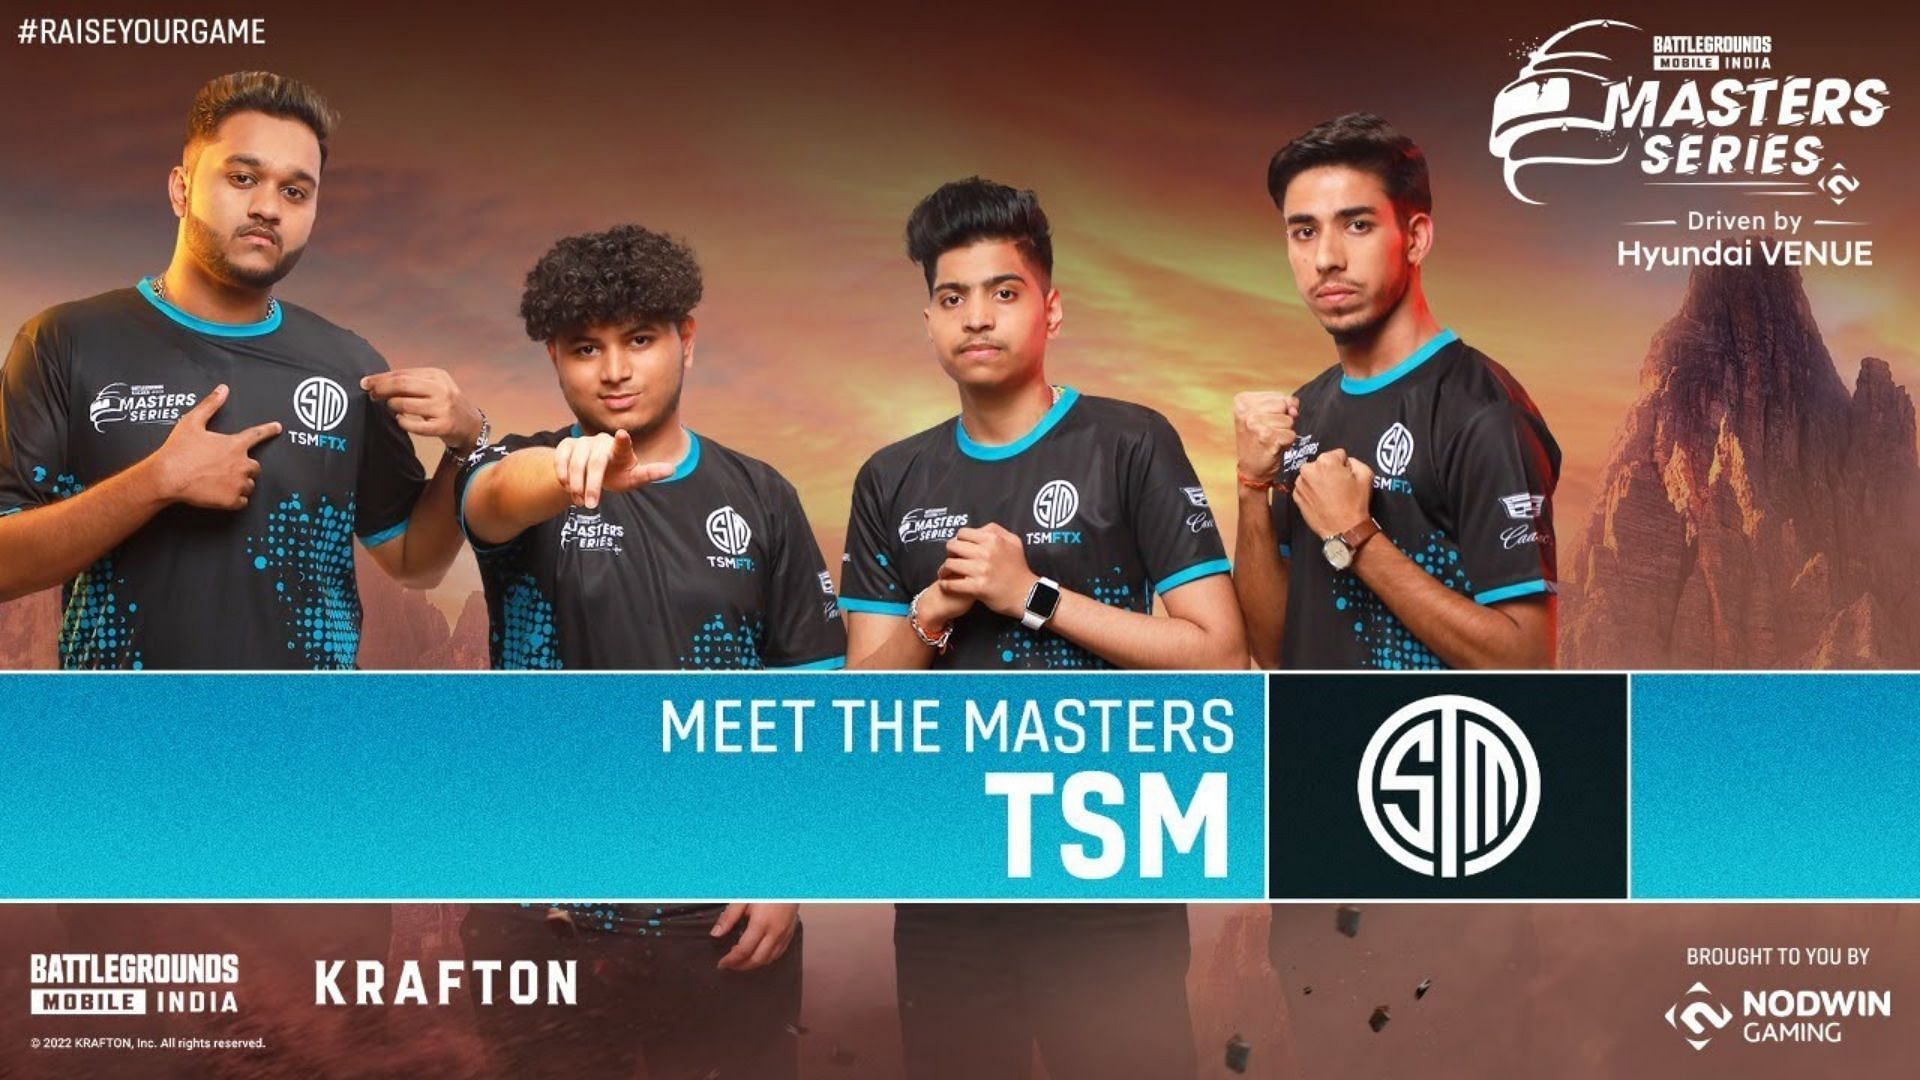 BGMI Masters Series Week 3 Day 3 will start at 8:00 pm IST (Image via Nodwin Gaming)